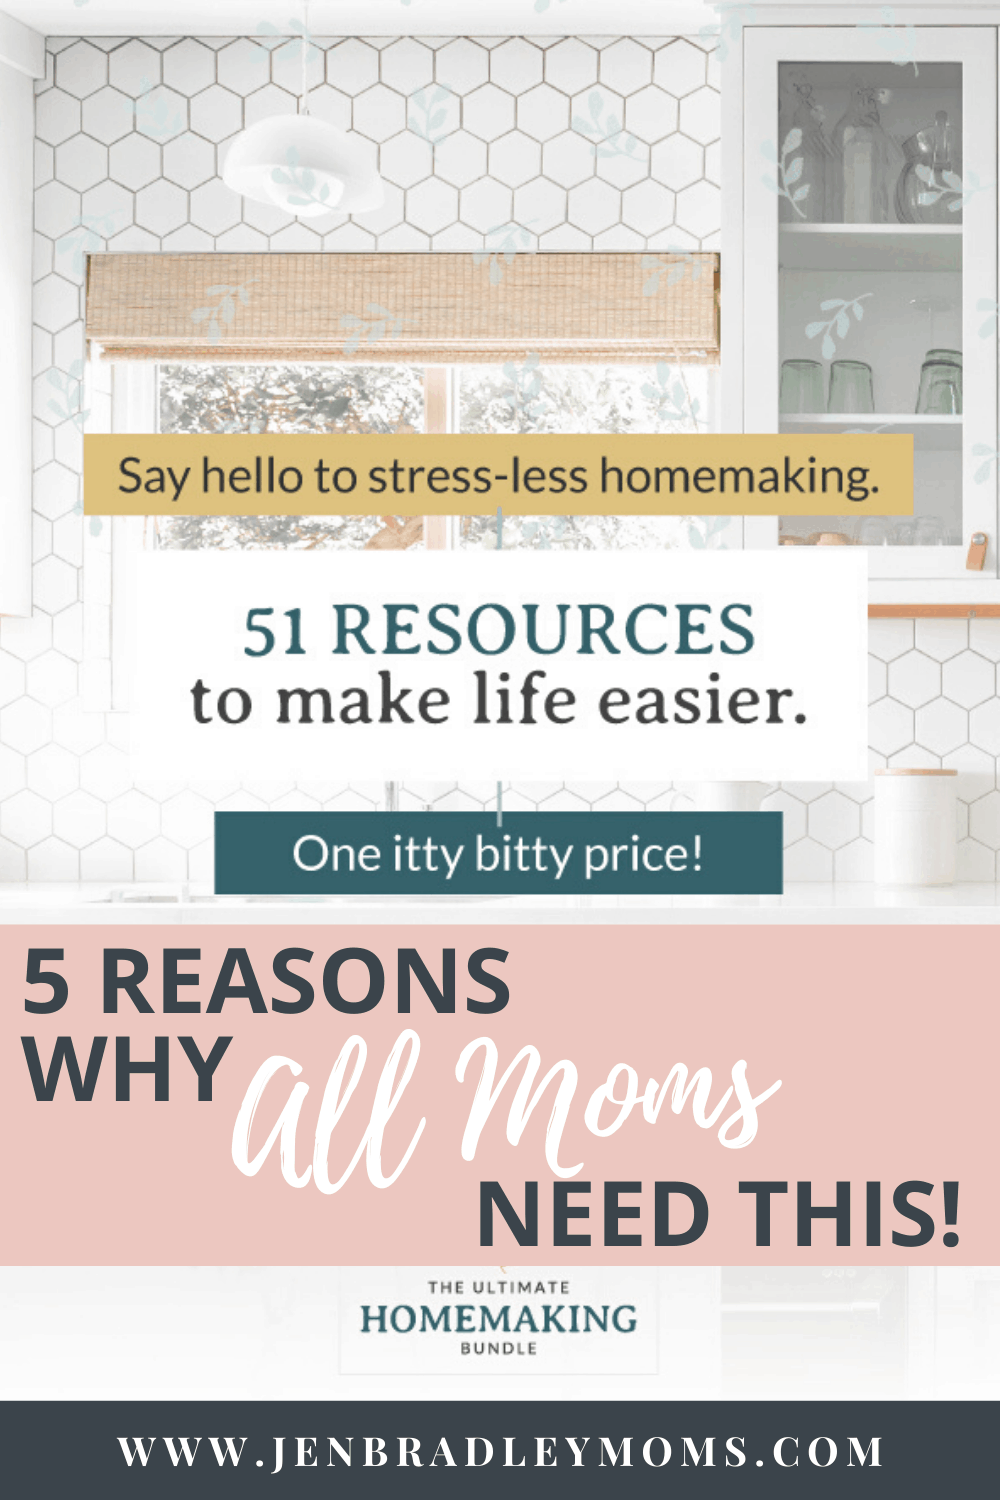 5 Reasons Why Every Mom Needs the Ultimate Homemaking Bundle